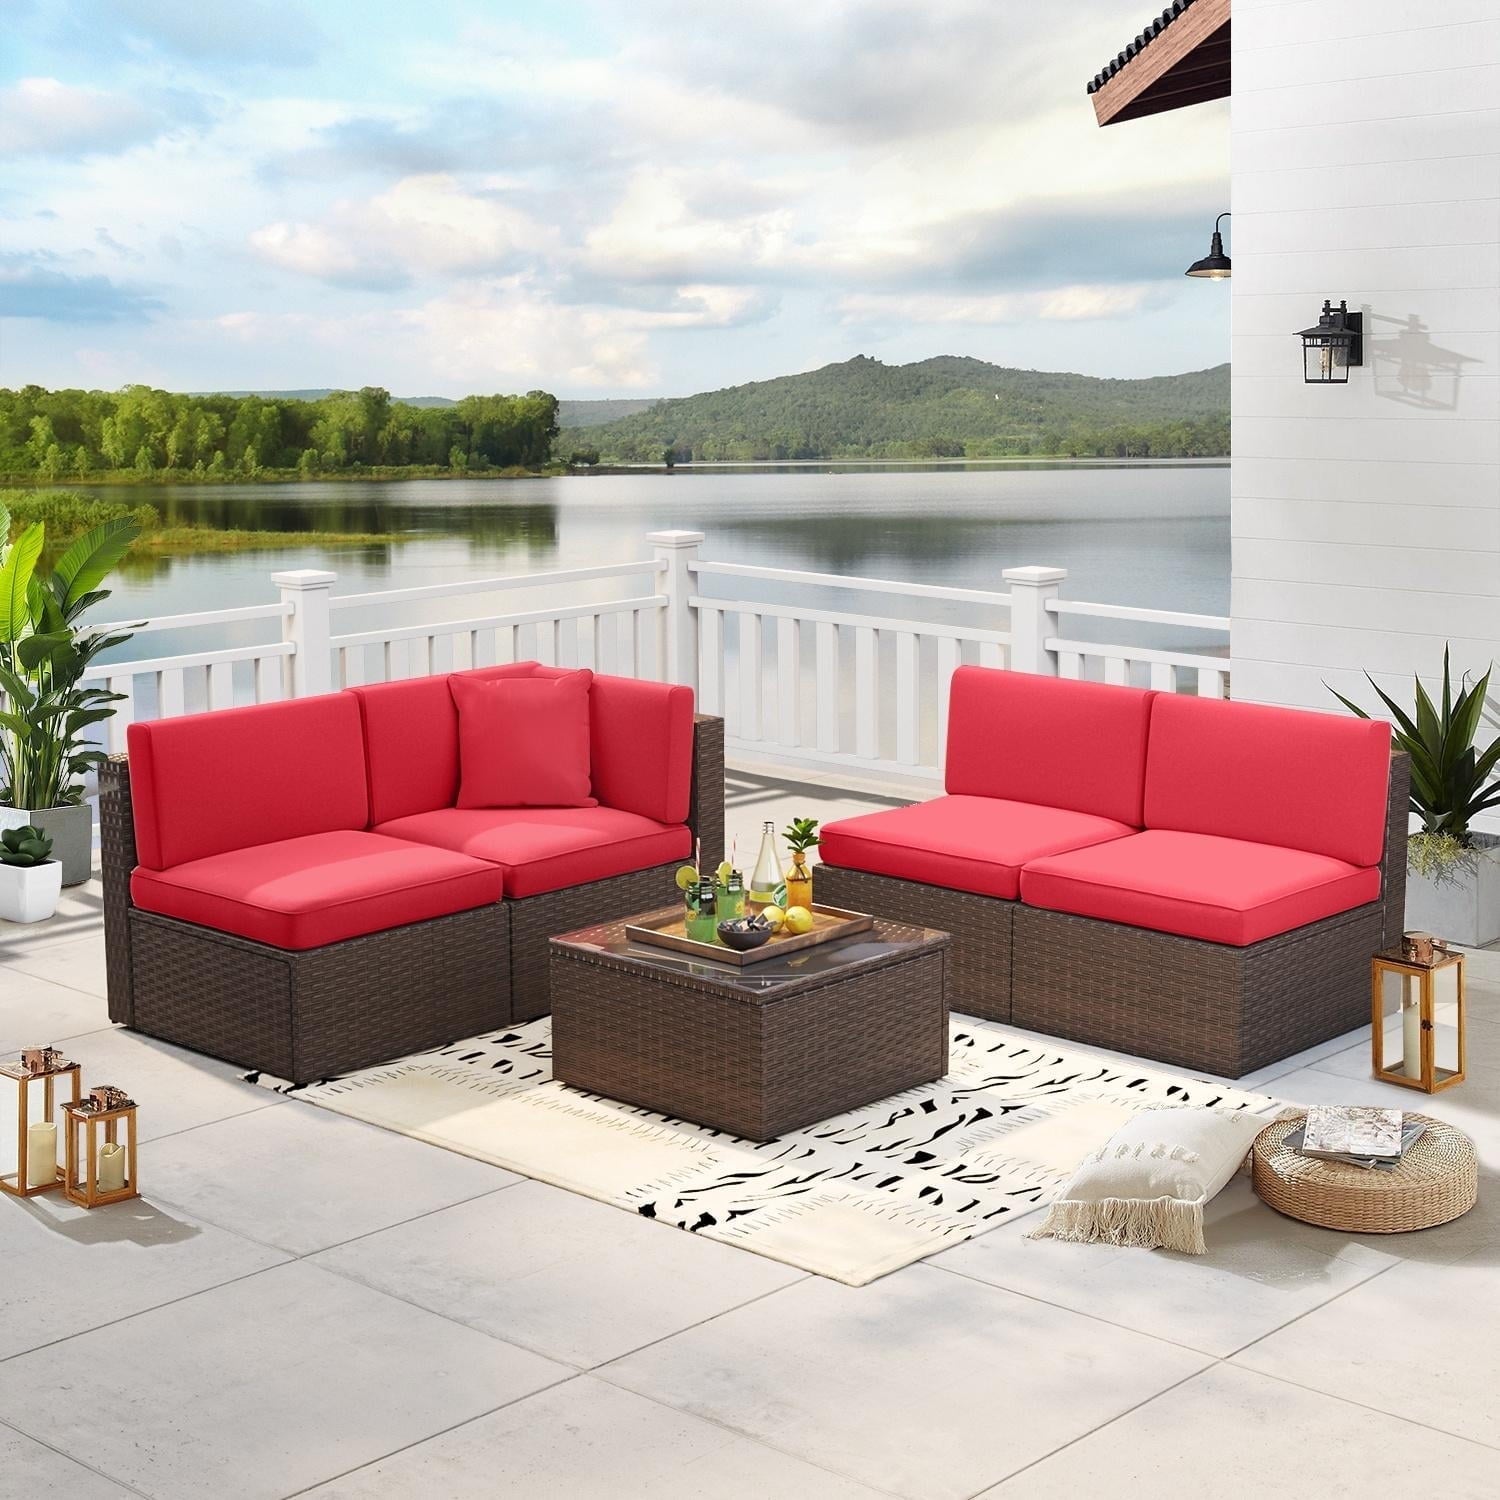 5-Piece Rattan Patio Conversation Set, Outdoor Patio Furniture Sets, Patio Furniture Sets with Coffe Table, Red Cushions, for Garden, Backyard, Poolside